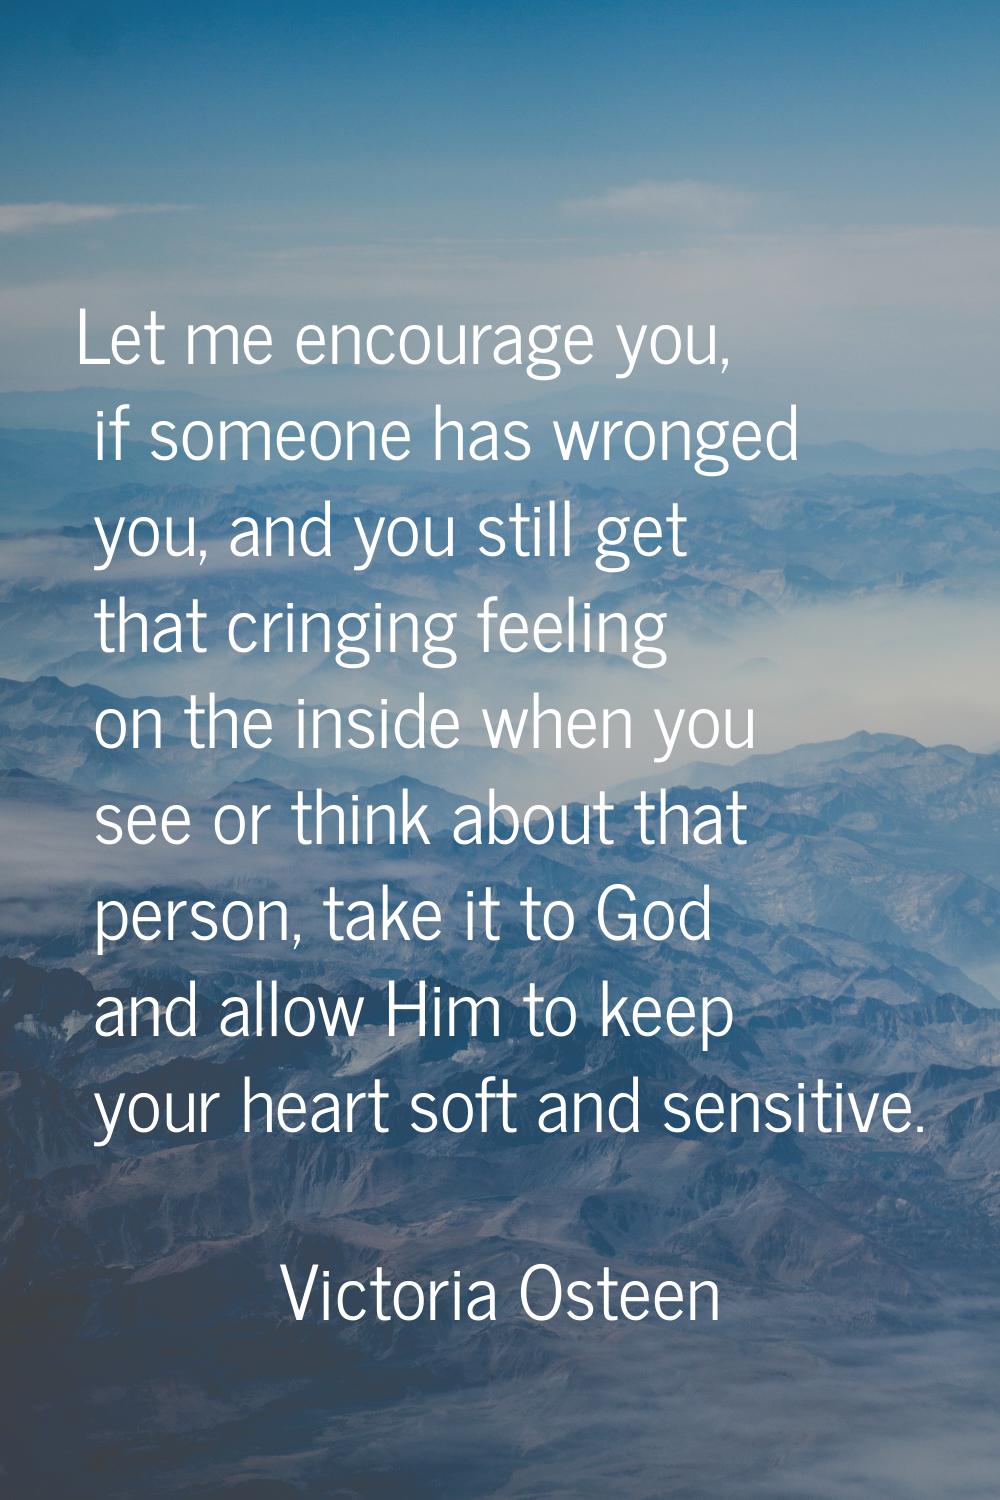 Let me encourage you, if someone has wronged you, and you still get that cringing feeling on the in